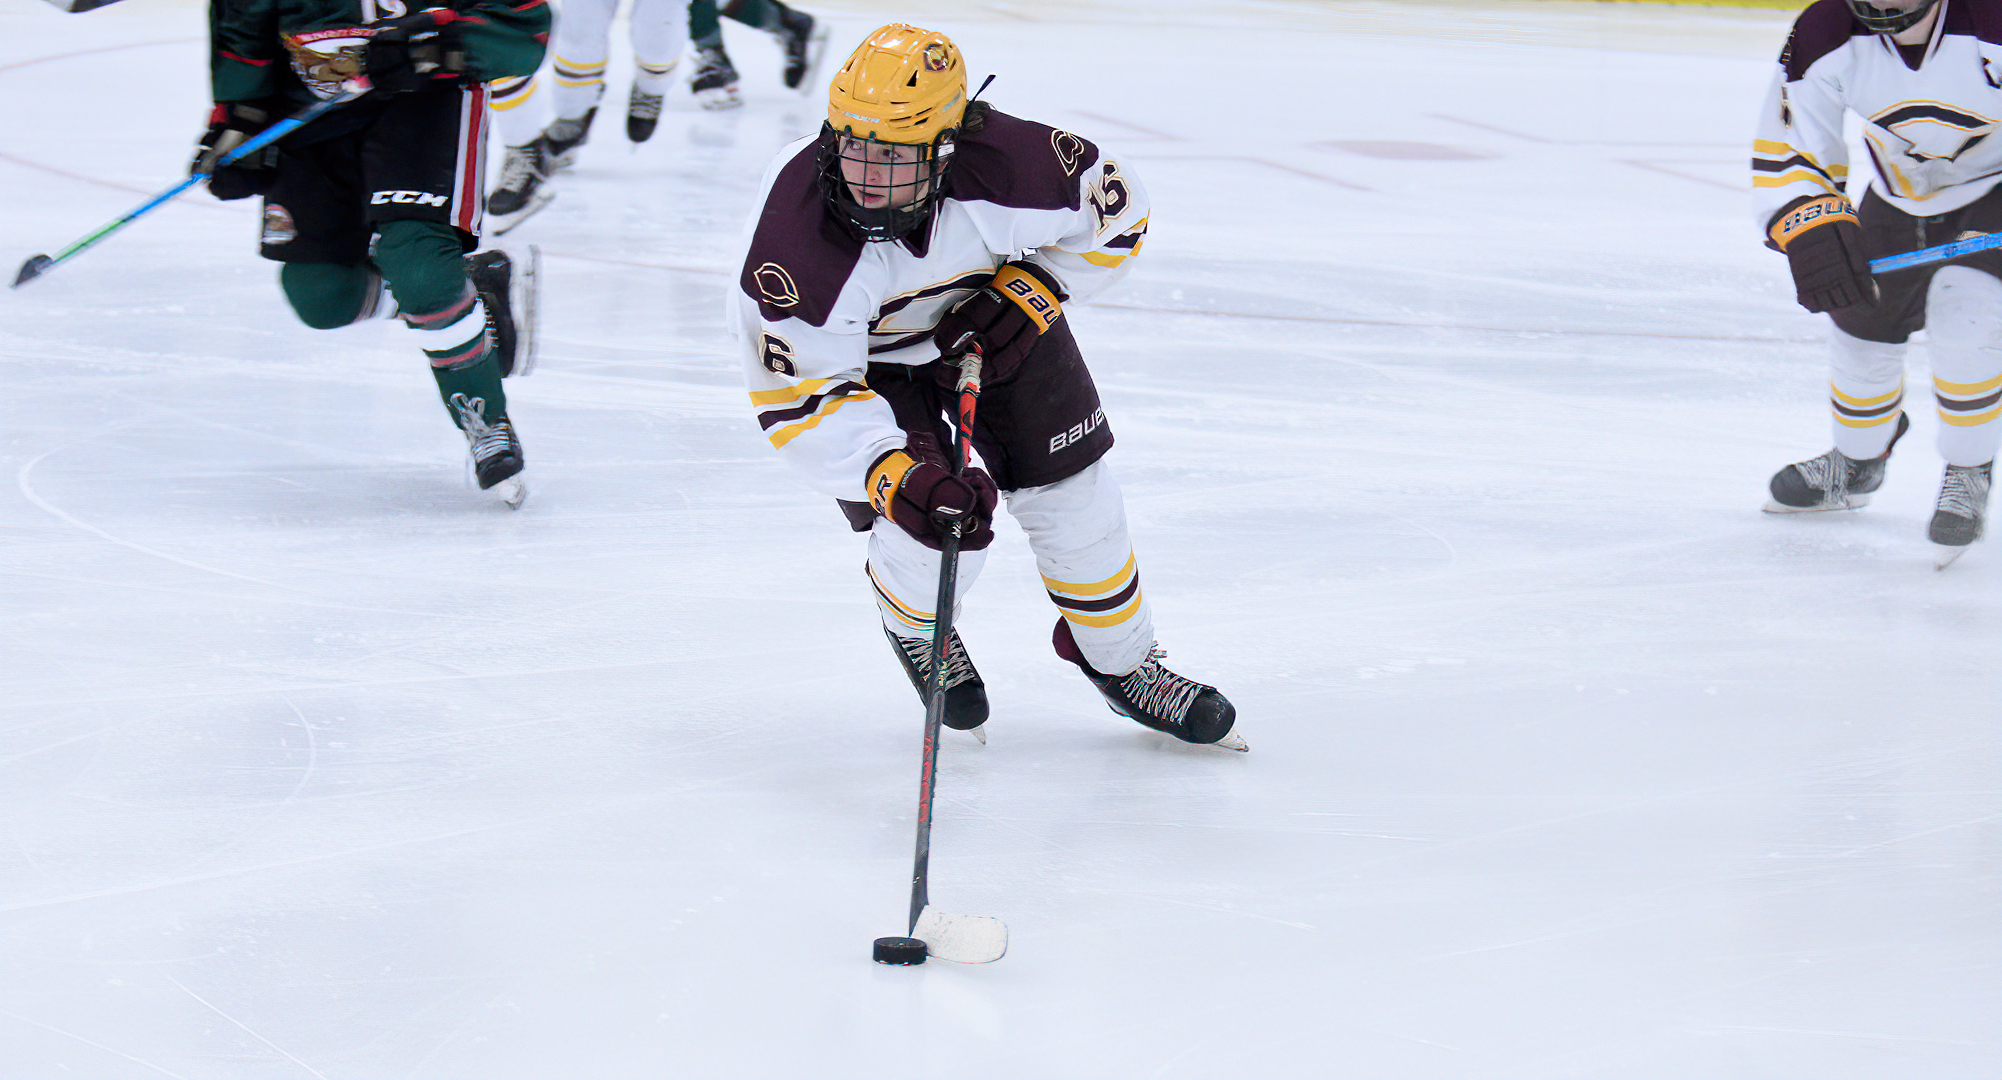 Senior Brenna Mjoness had two goals in the third period and nearly helped the Cobbers come back from a 2-goal deficit at St. Mary's.